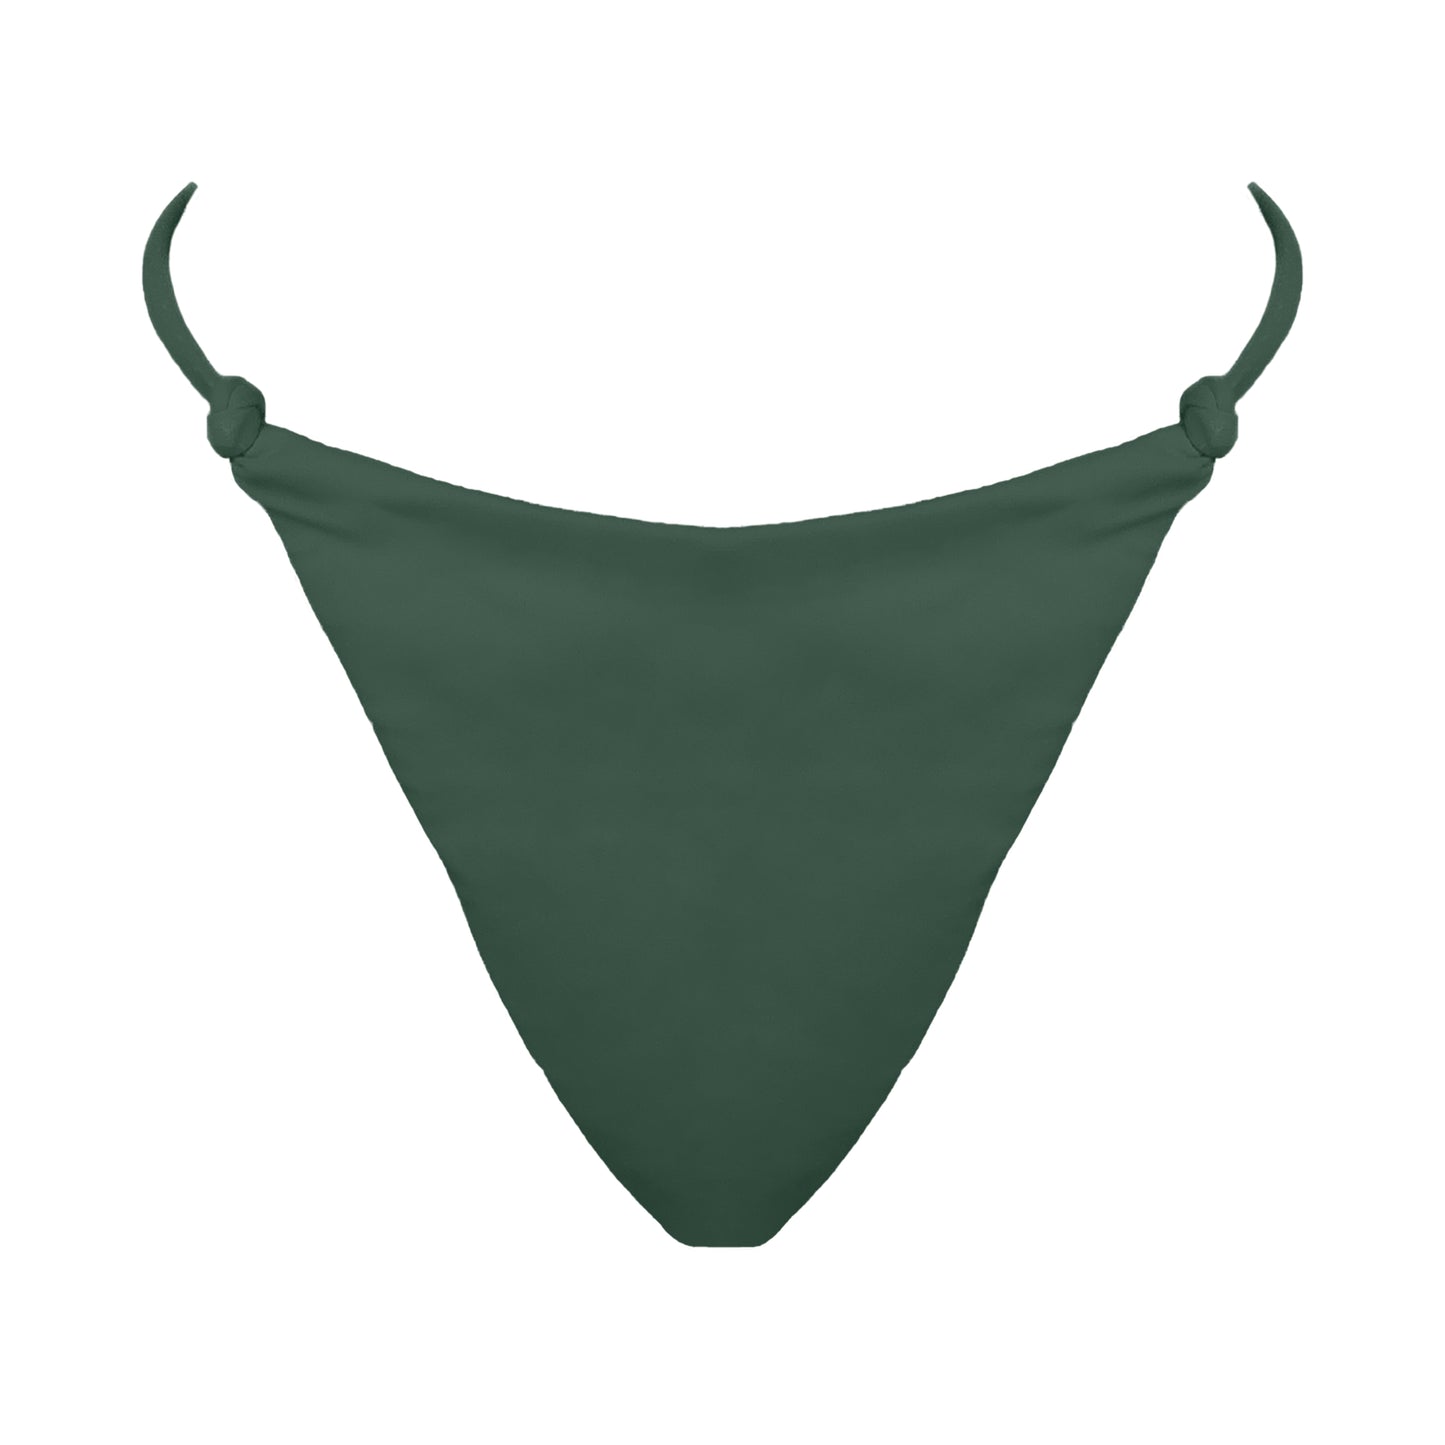 Sage green Skinny side strap mid rise bikini bottom with tie knot details, high cut sides and cheeky coverage.